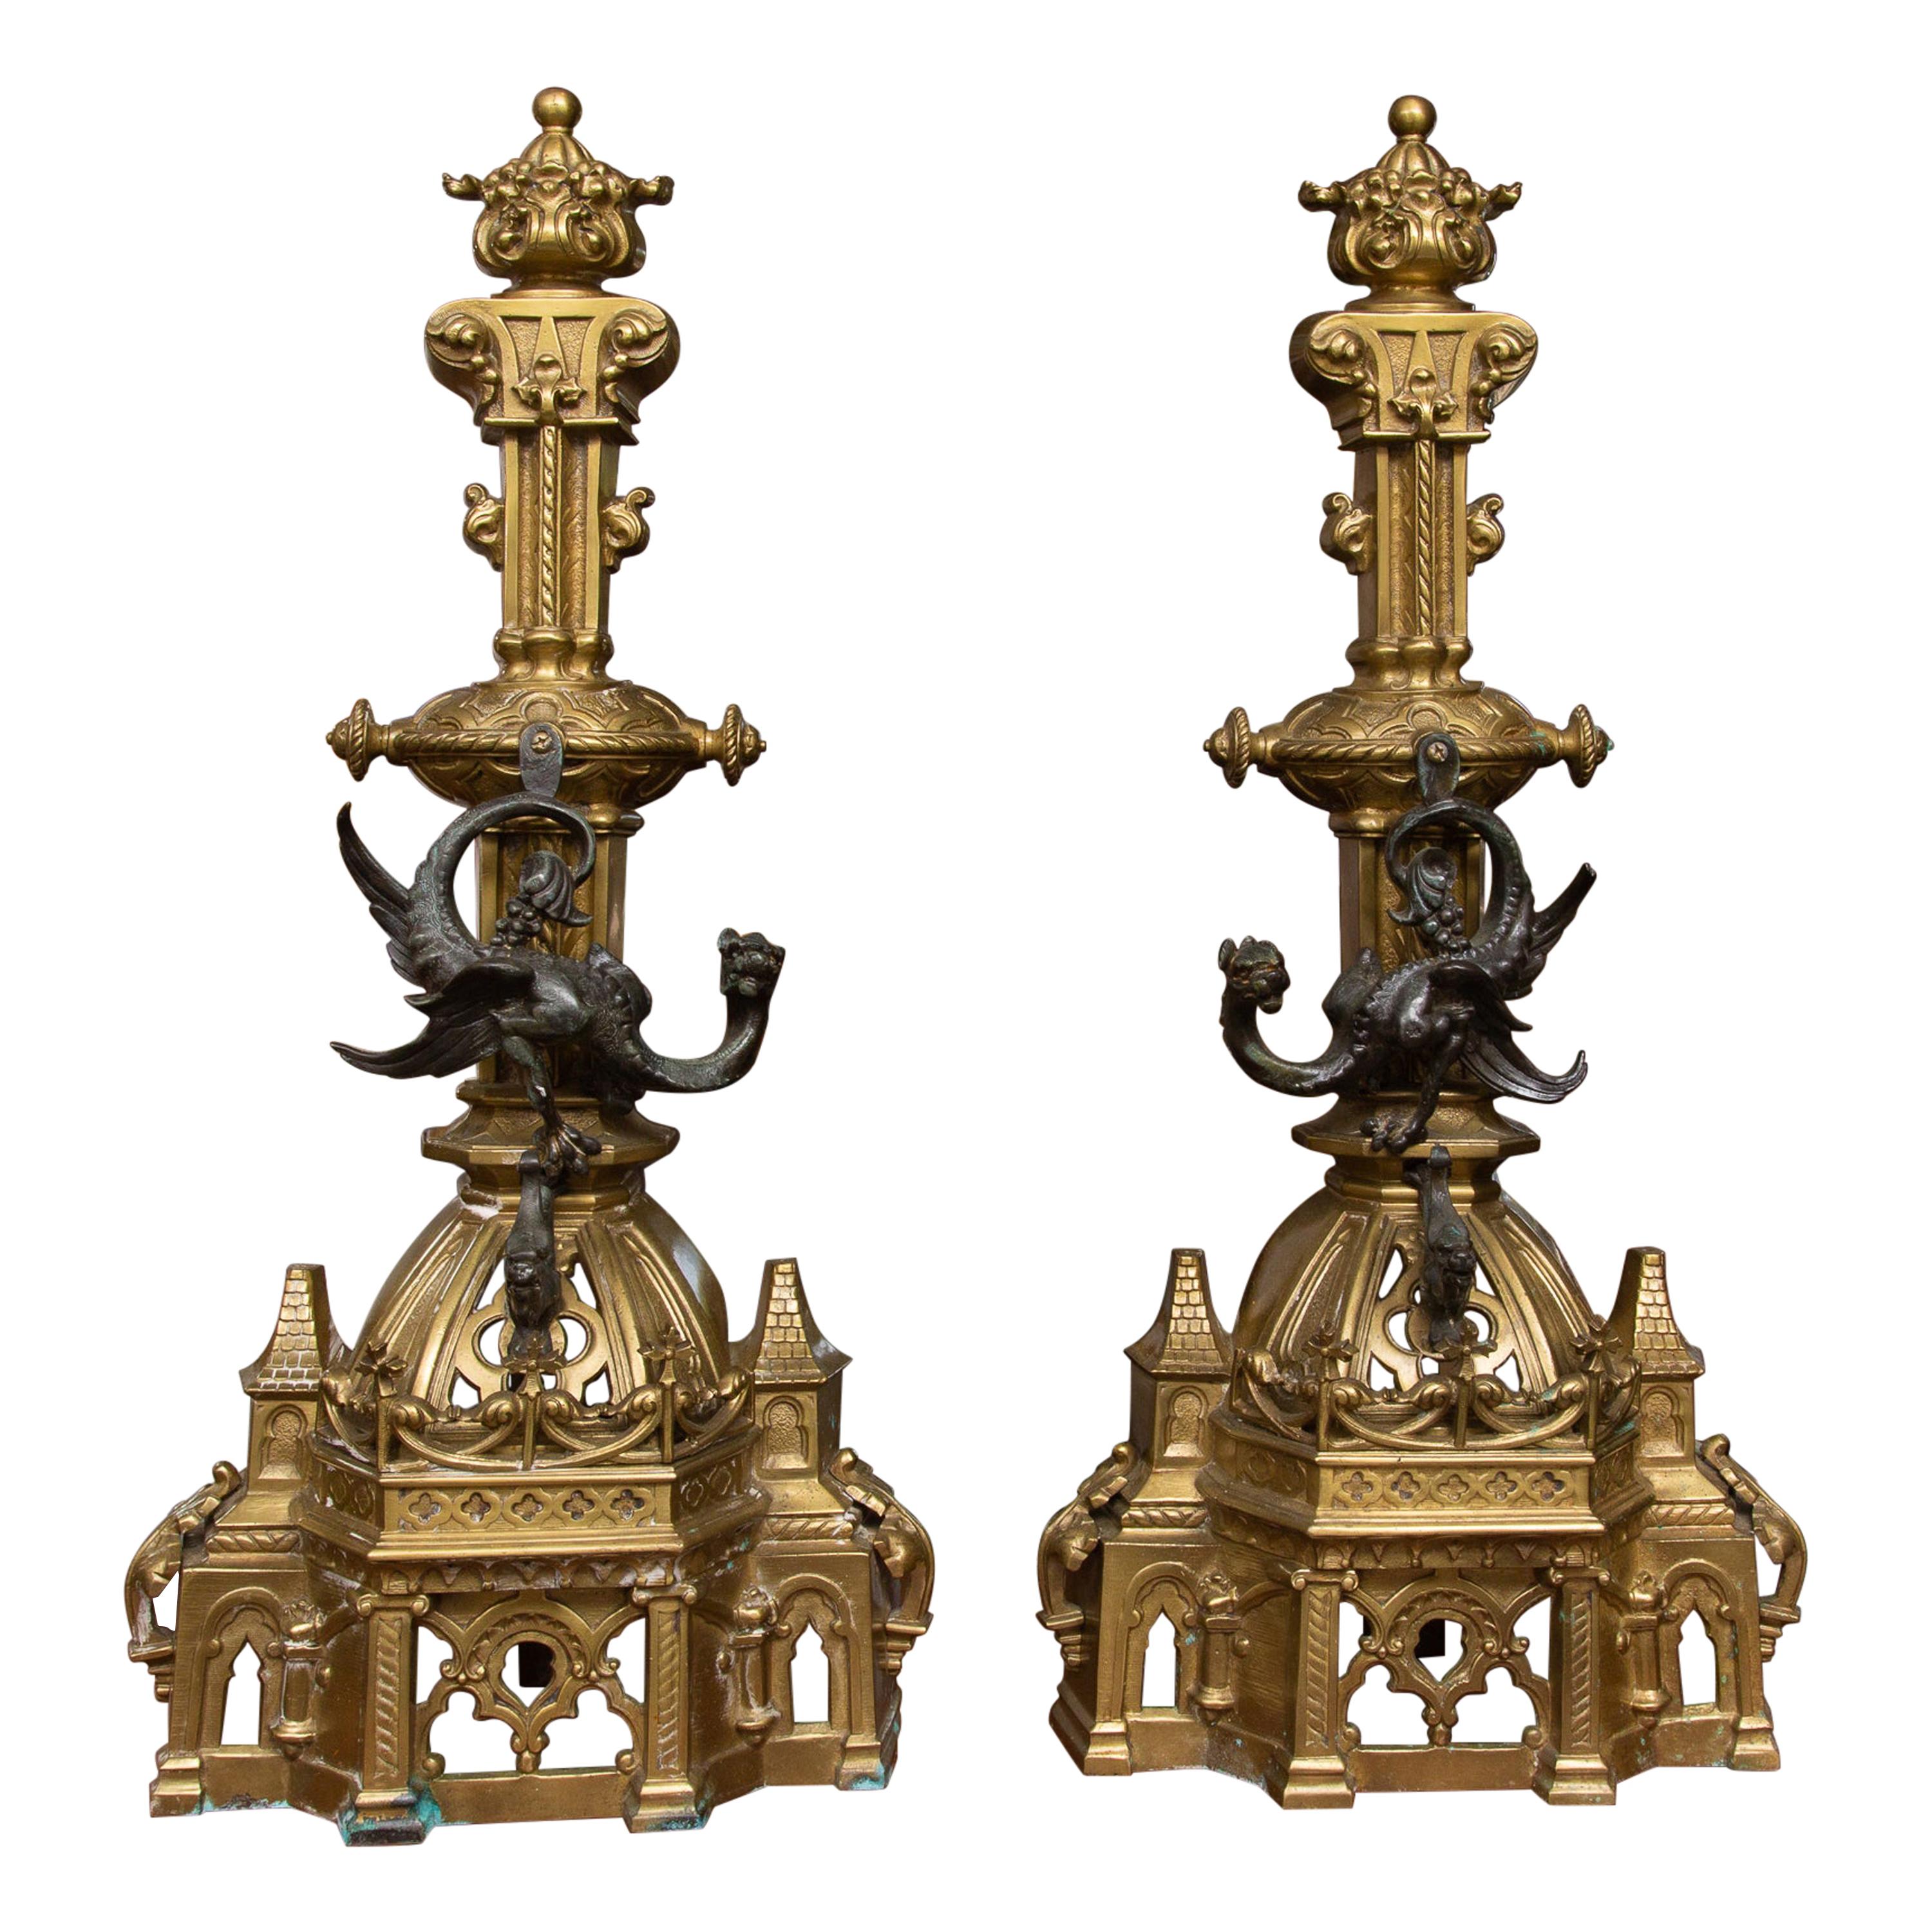 19th Century Pair of English Gilt and Patinated Bronze Andirons